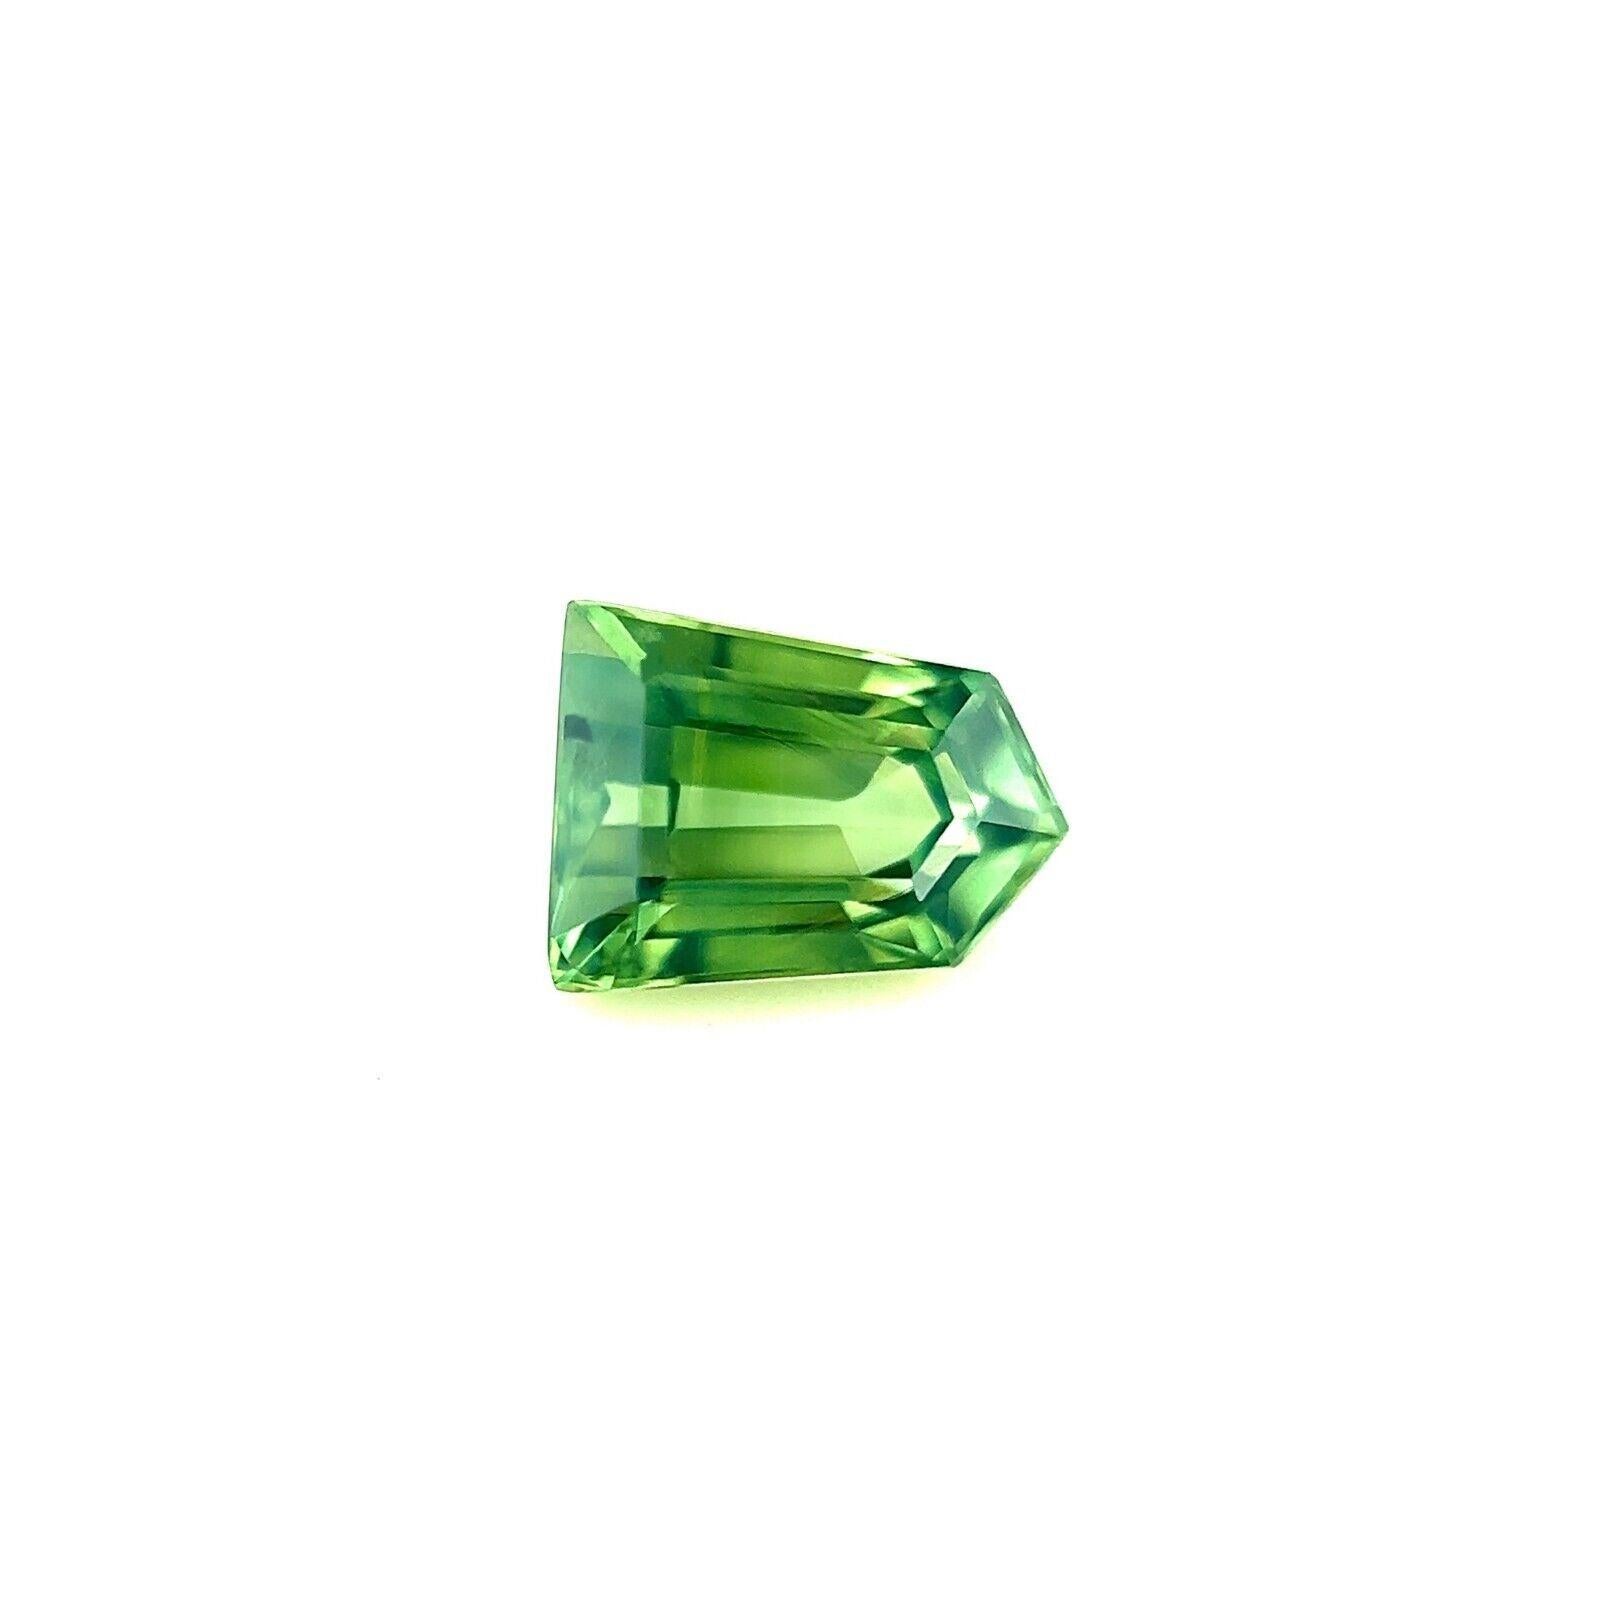 GRA Certified 1.00Ct Fancy Cut Yellow Green Sapphire Untreated Gem VVS

Unique Natural GRA Certified Untreated Yellow Green Sapphire Gemstone.
1.00 Carat sapphire with a beautiful vivid yellow green colour and an excellent fancy cut and ideal polish